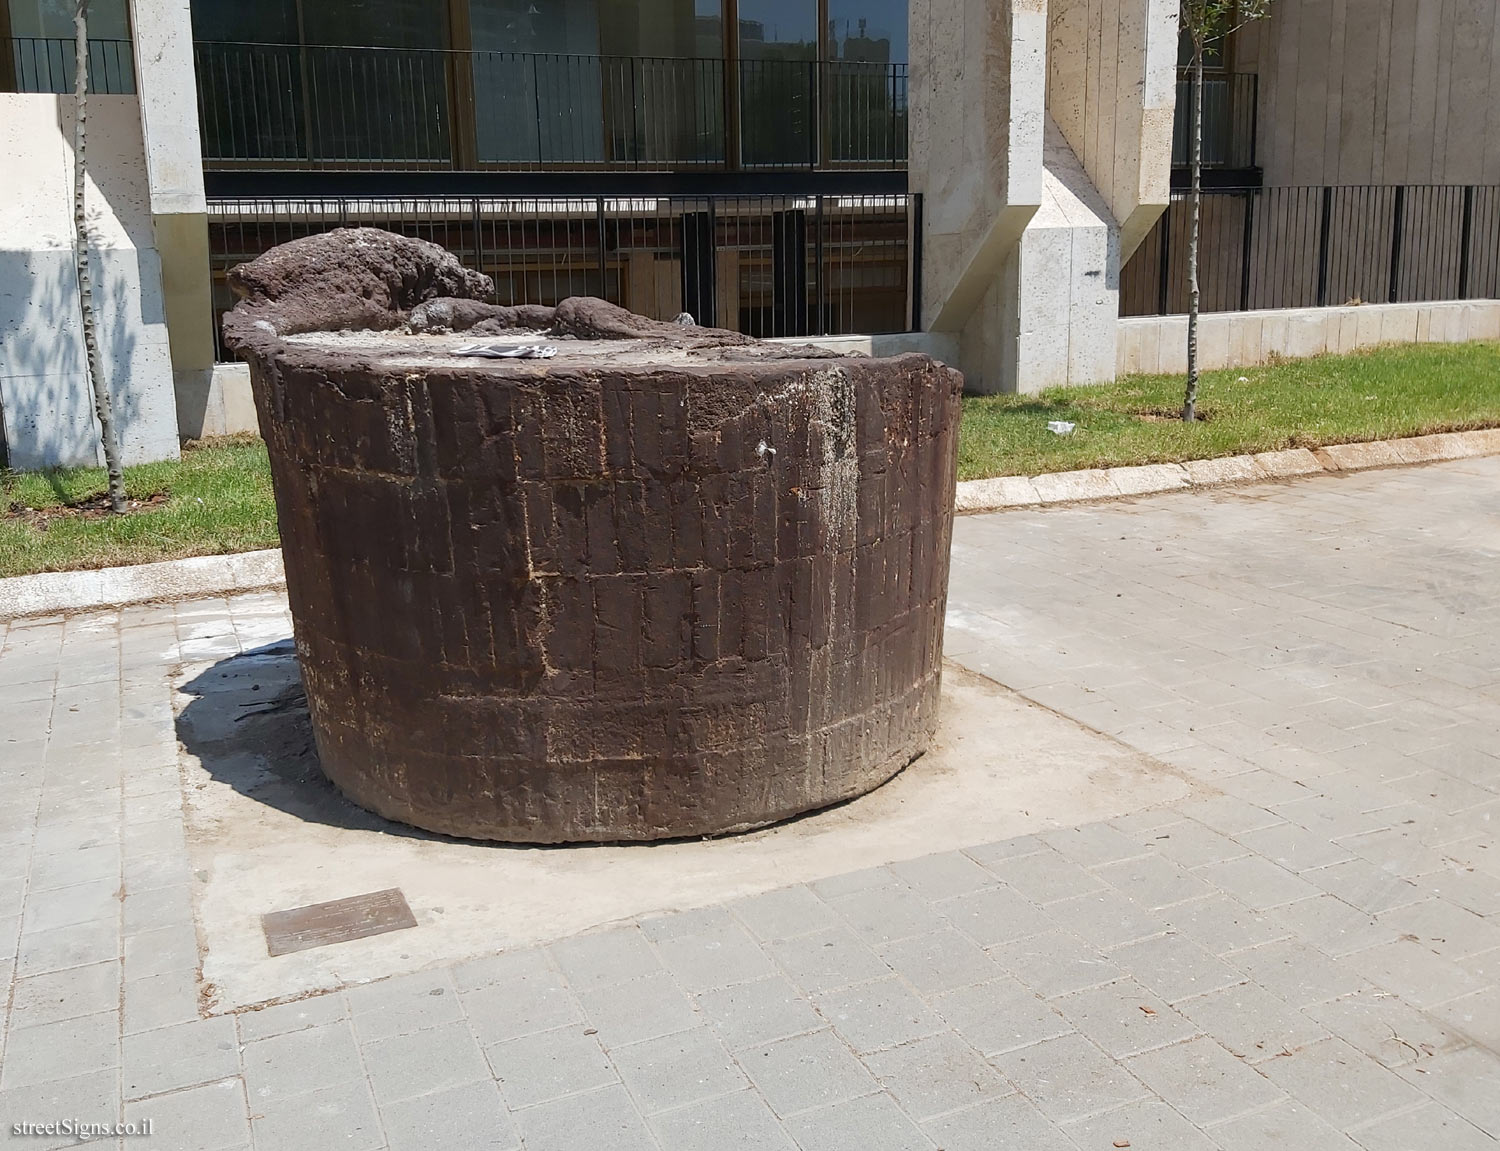 "Blocked Well and Fossilized Lily 1" - Outdoor sculpture by Yaacov Dorchin - Sderot Sha’ul HaMelech 25, Tel Aviv-Yafo, Israel